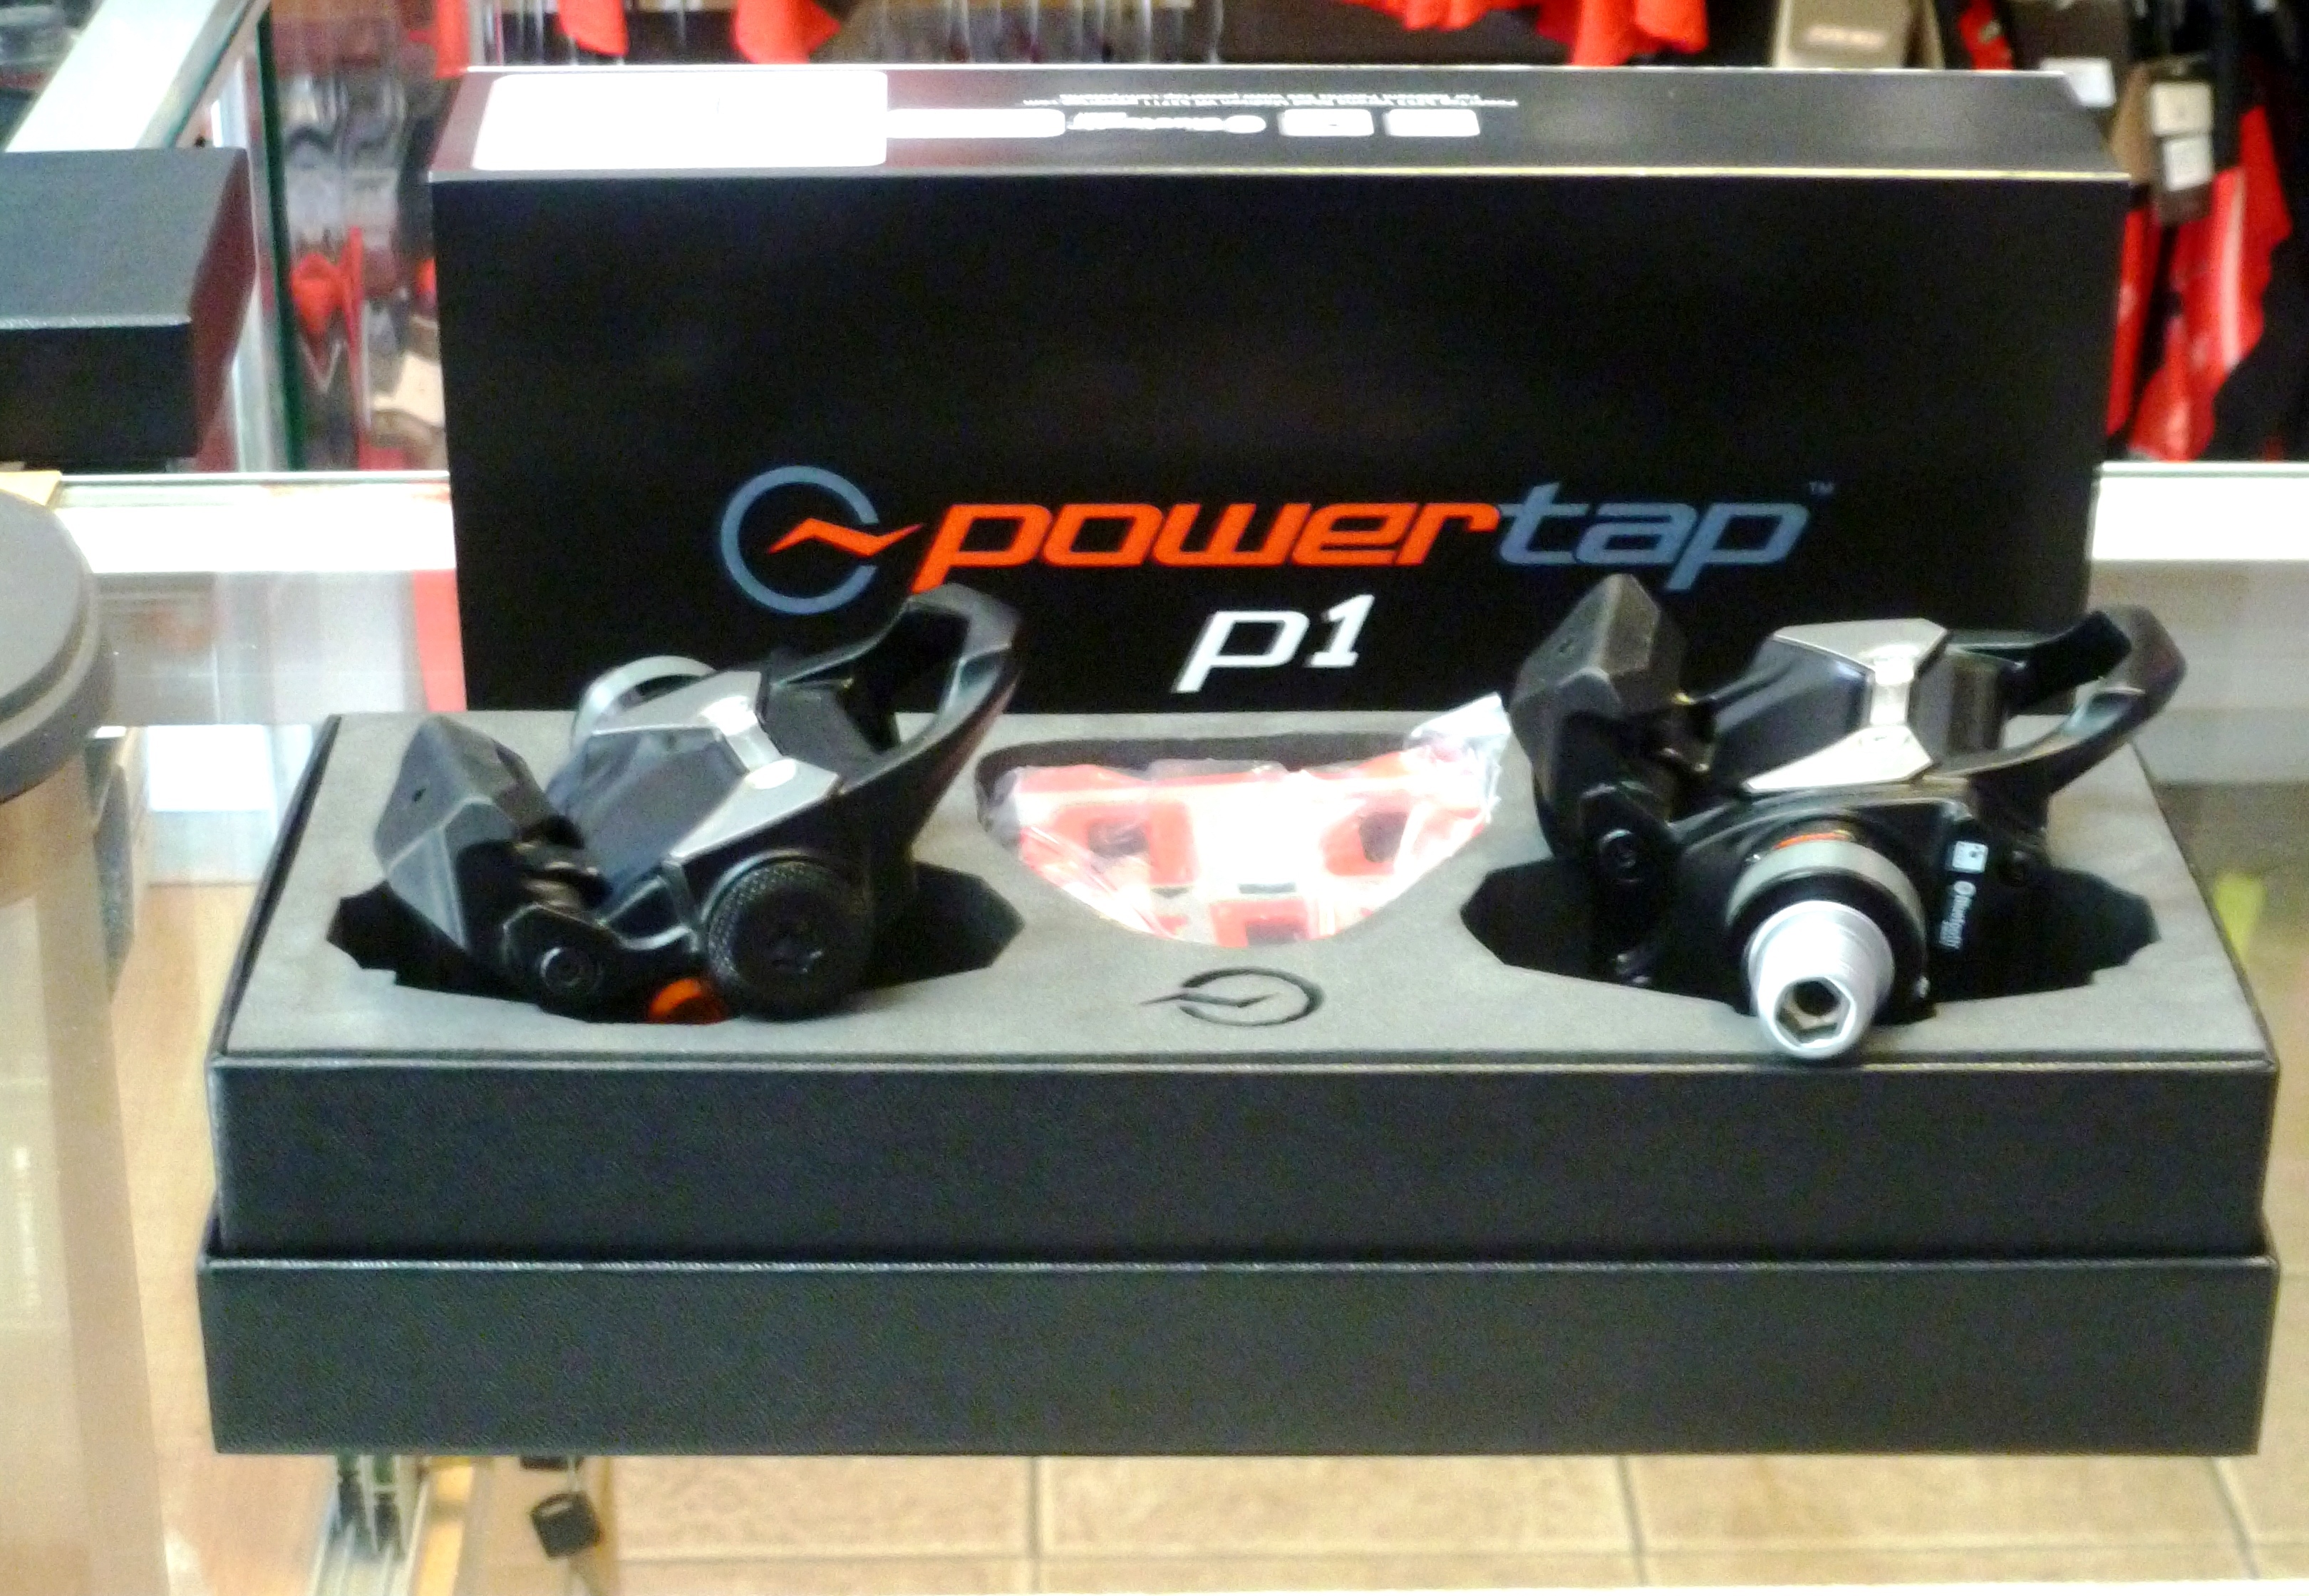 Powertap P1 power meter pedals at the sport factory